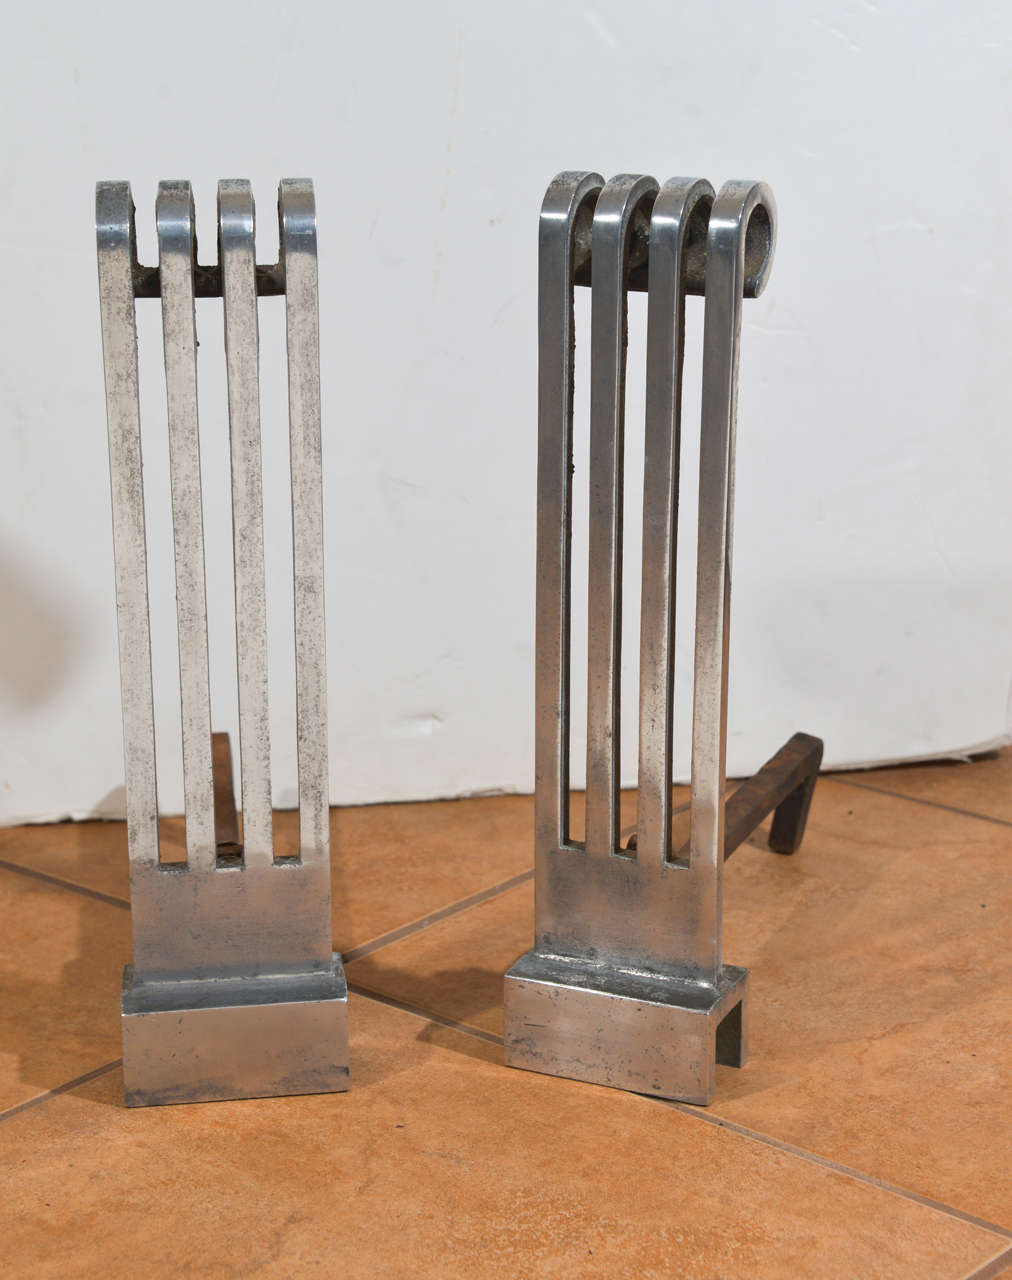 Extruded aluminum and iron andirons originally designed by Donald Deskey in 1929/30.  Andirons and firedogs all stamped 1191,  ca. 1933.  Remnants of original black enamel verso and between tines.  original, as used condition.  Well documented